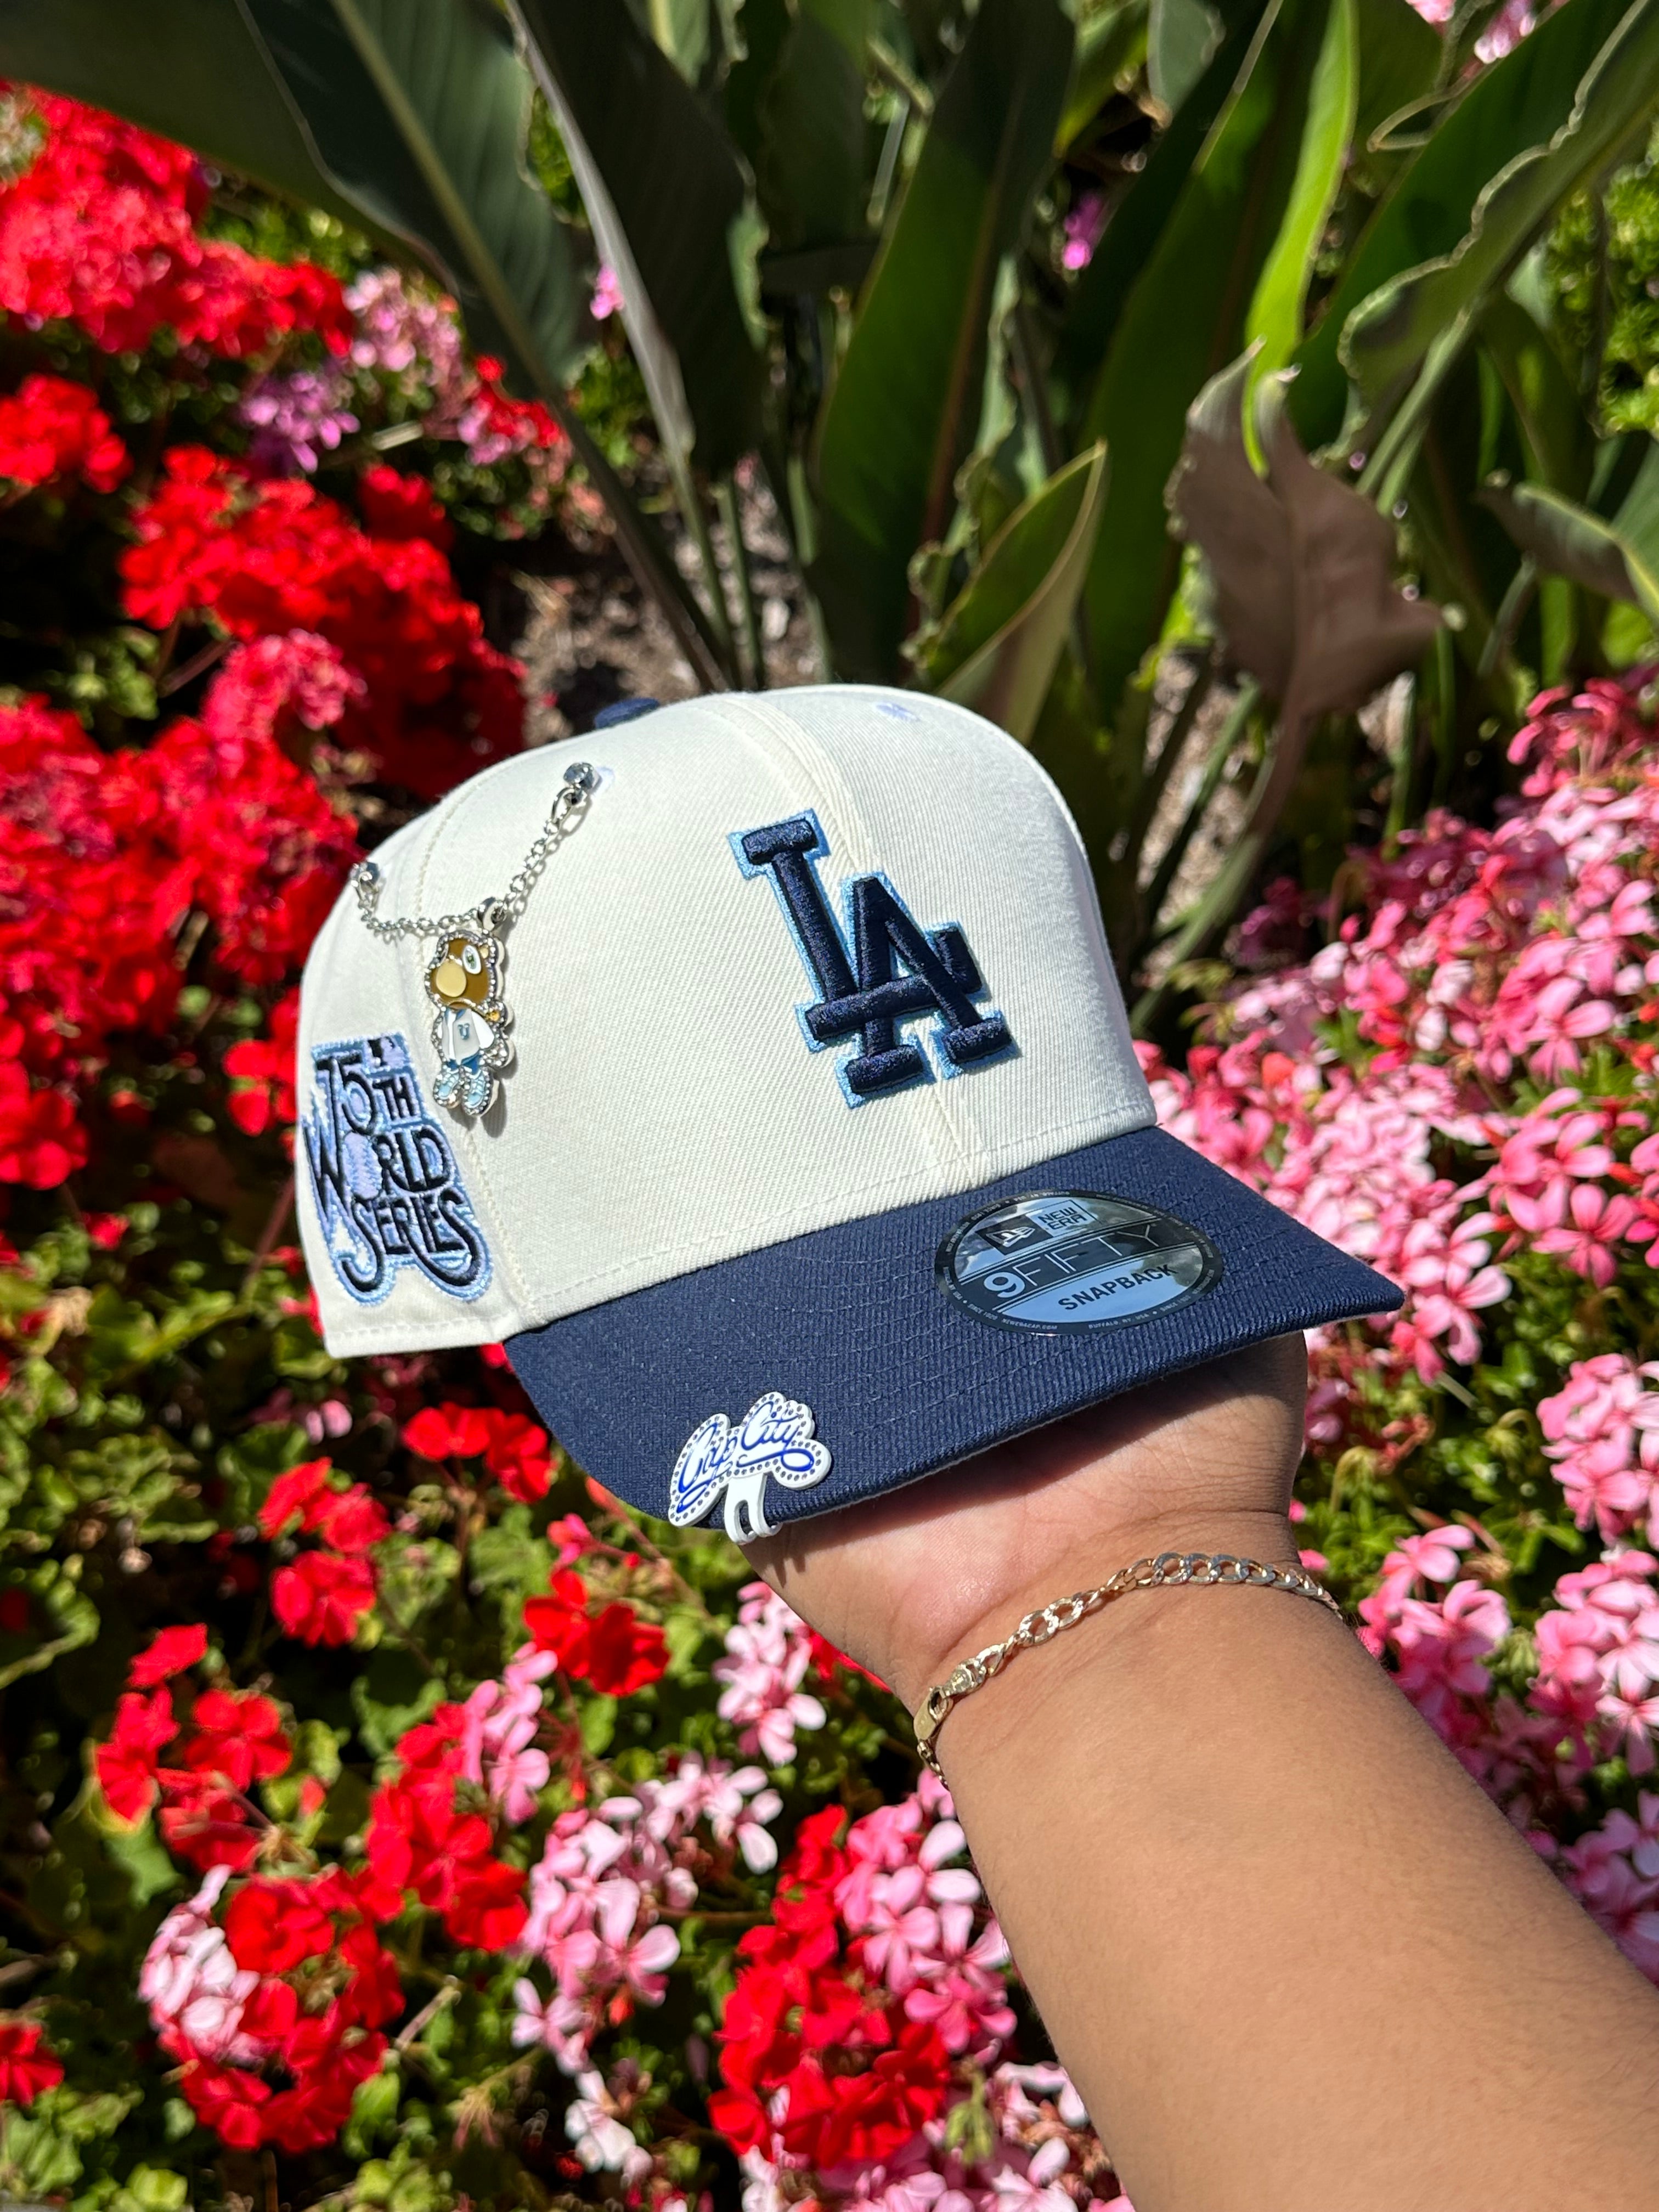 NEW ERA EXCLUSIVE 9FIFTY CHROME WHITE/NAVY LOS ANGELES DODGERS SNAPBACK W/ 75TH WORLD SERIES PATCH